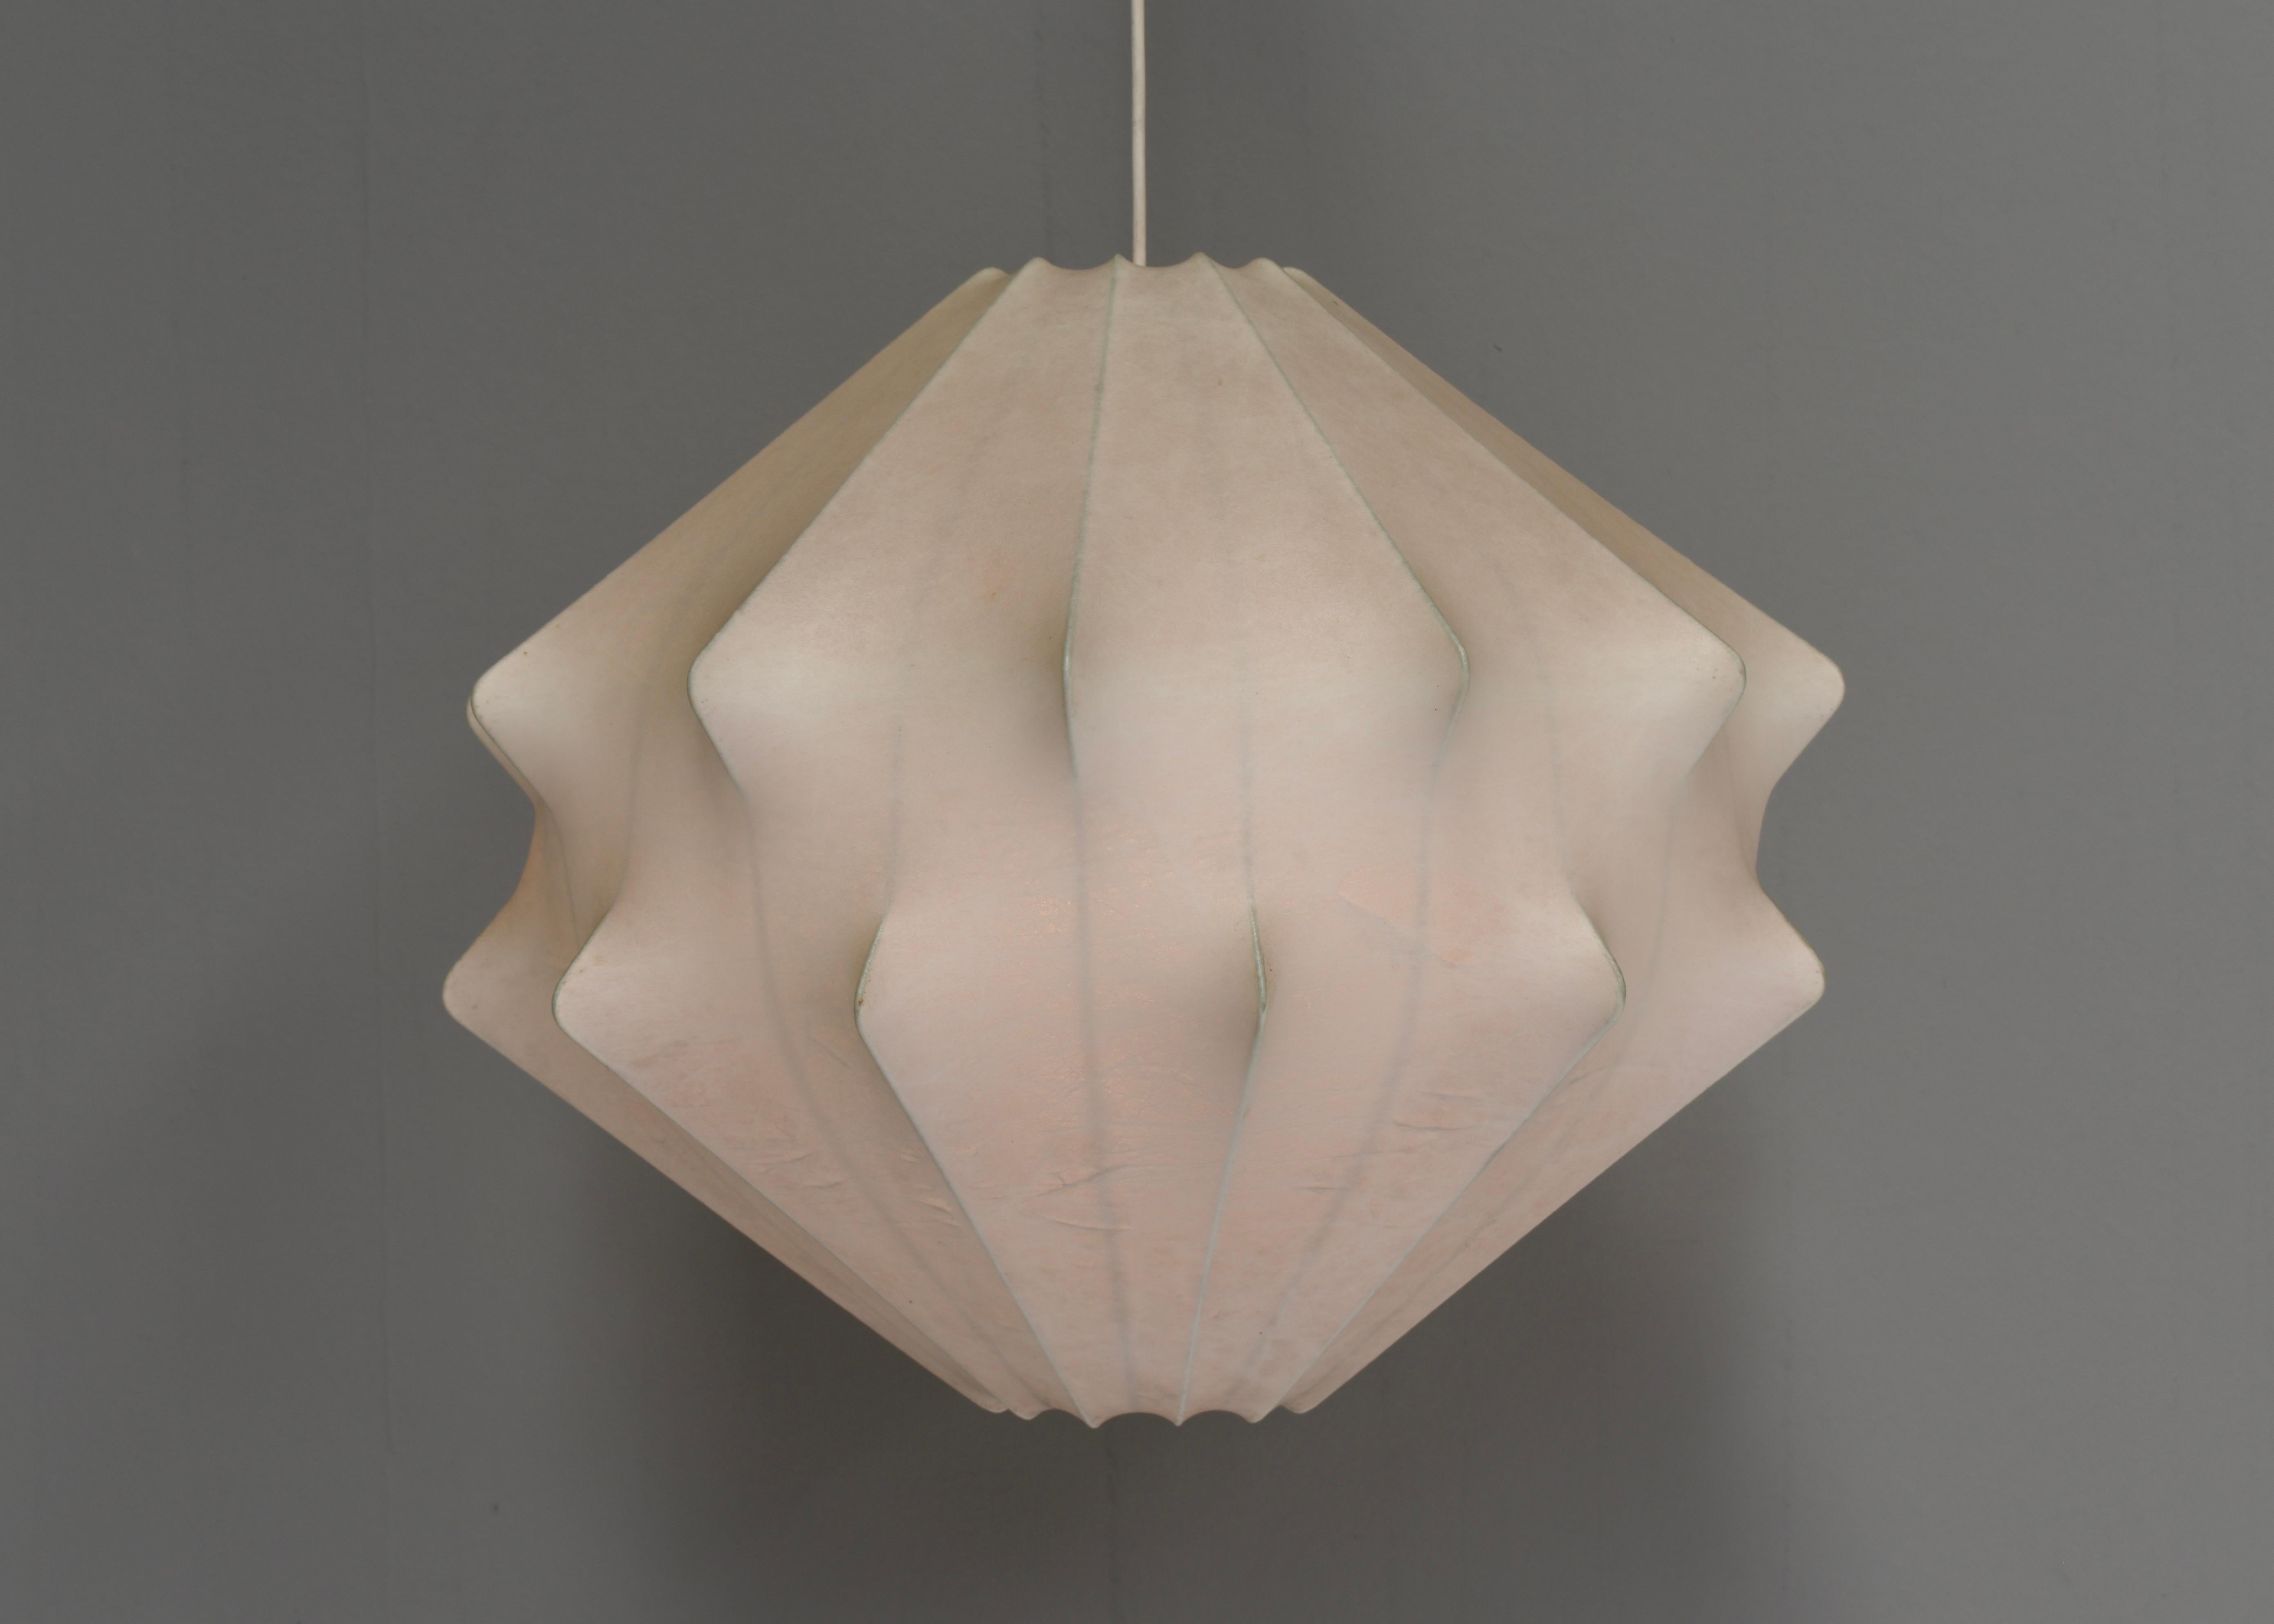 Metal Goldkant Cocoon Pendant Lamp by Friedel Wauer, Germany, circa 1960